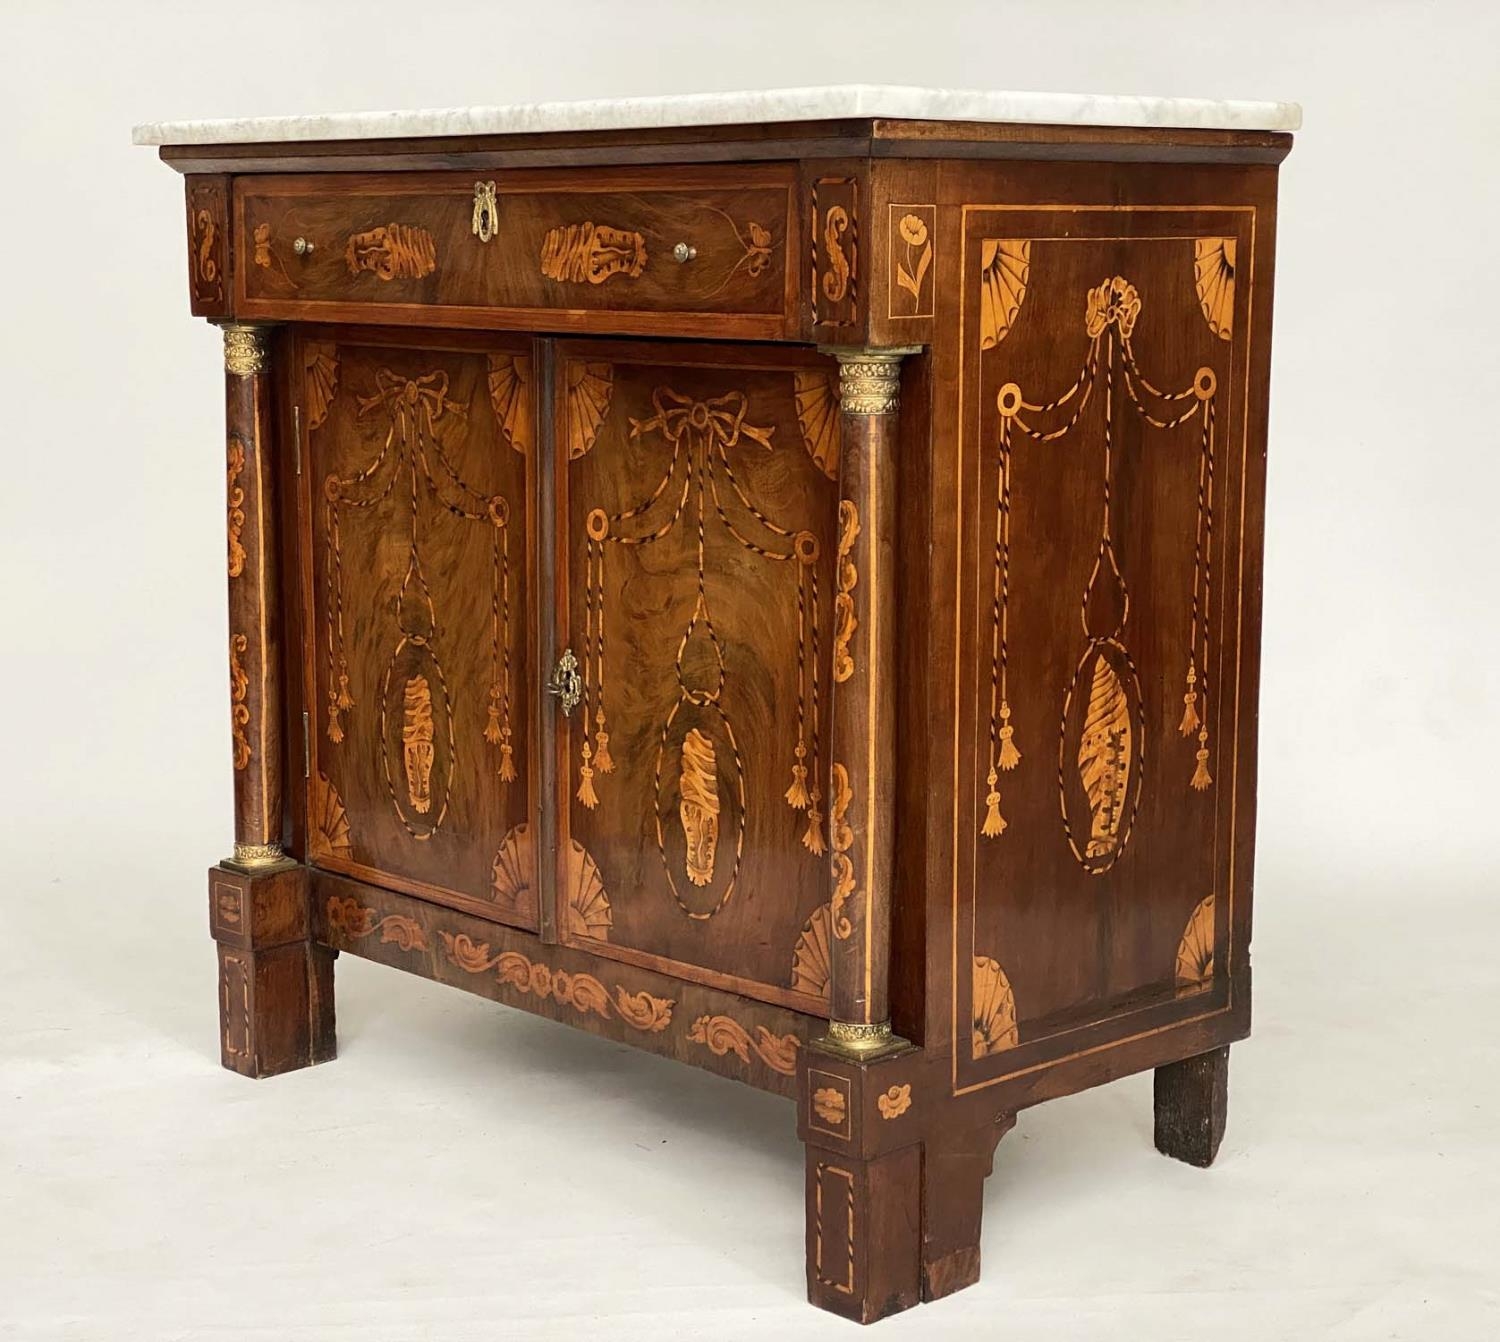 DUTCH SIDE CABINET, early 19th century Dutch mahogany and satinwood inlay with marble top, frieze - Image 2 of 6